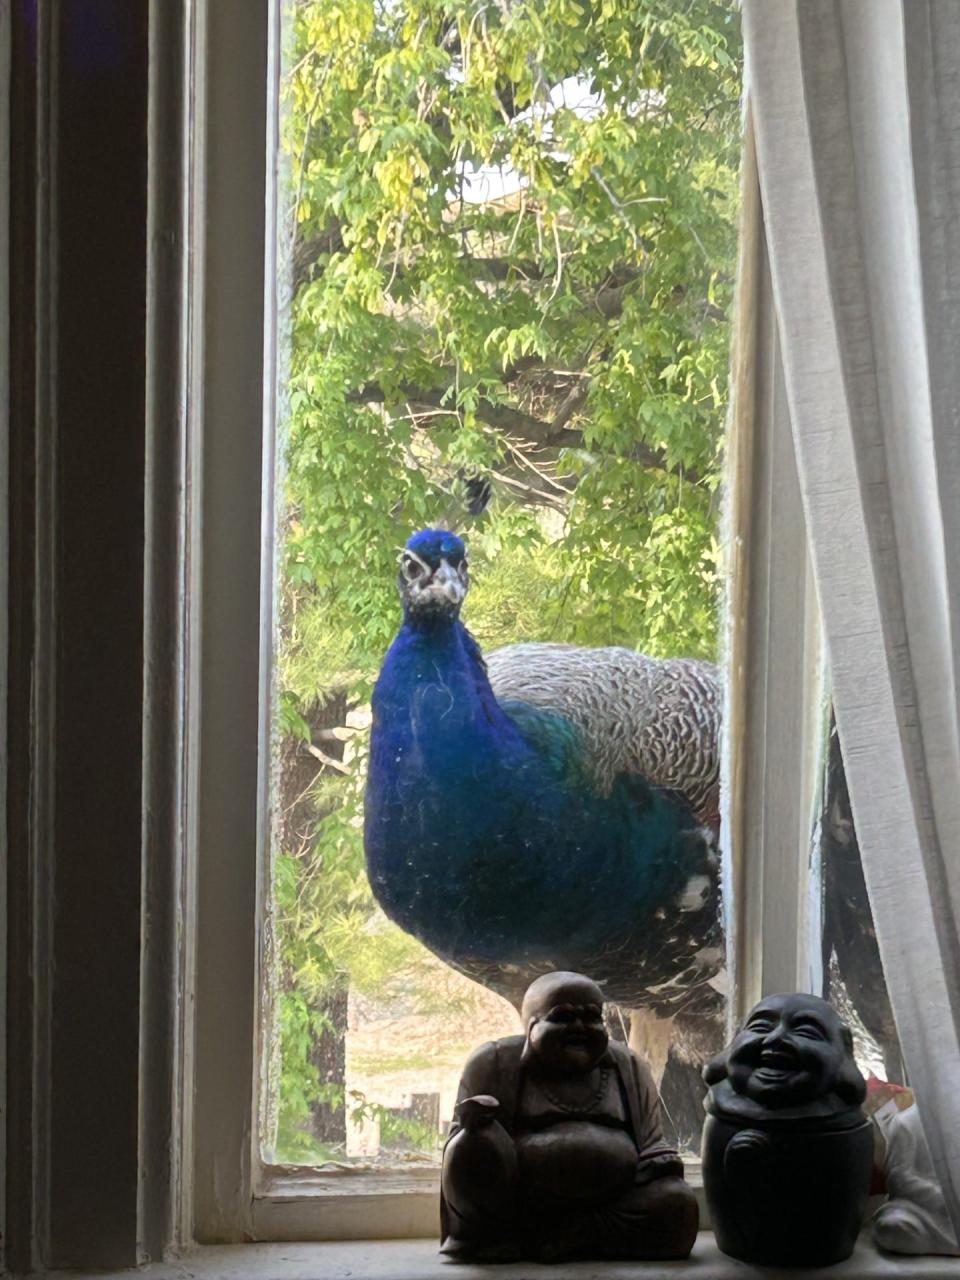 A peacock from Legendary Acres Hobby Farm peers into the second floor window of the farm house.